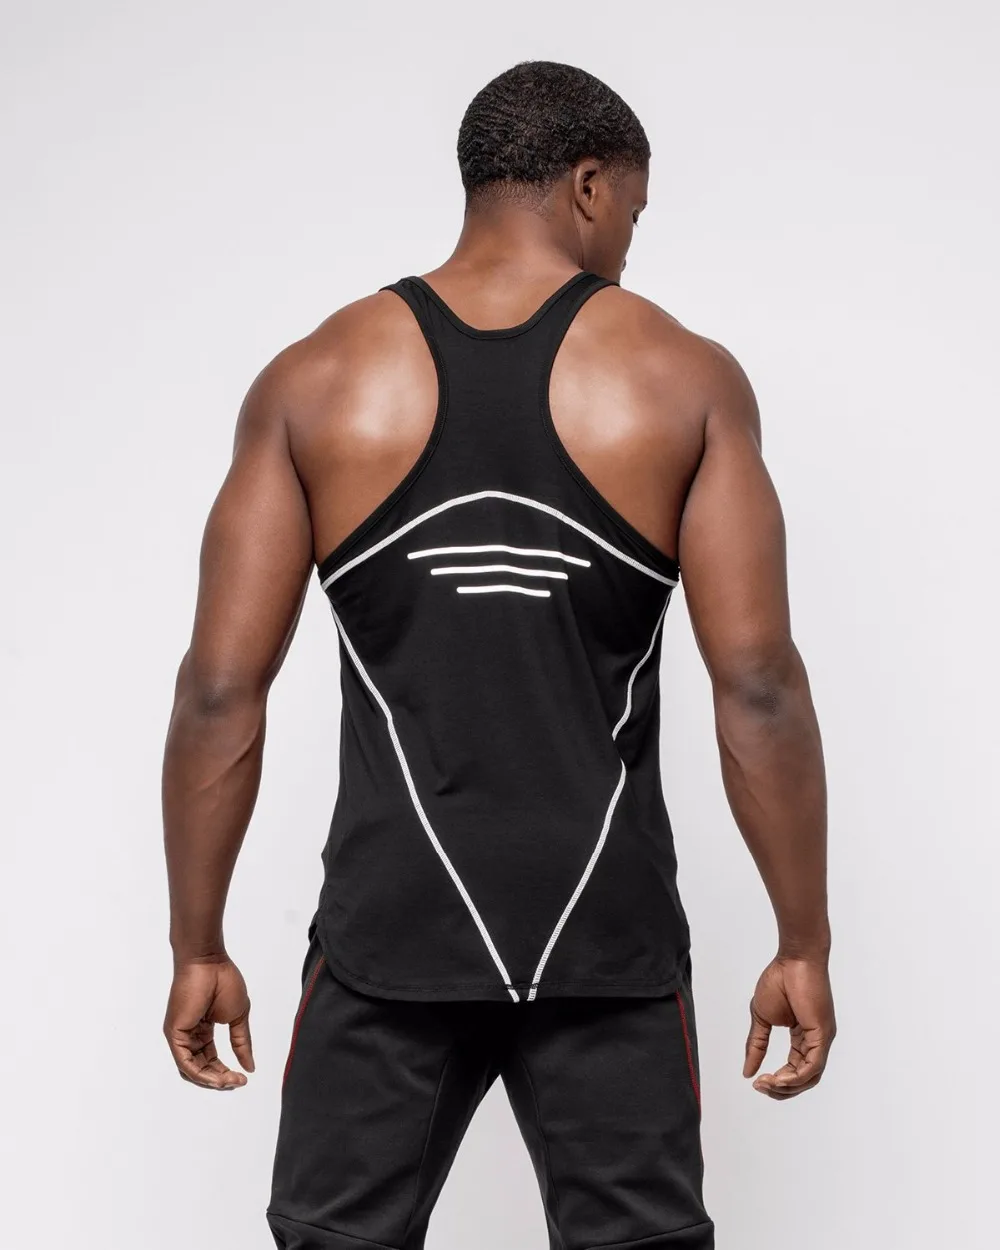 Hera Hero Men's Body Slimming Compression Sleeveless Tight vest Fitness Moisture Wicking Workout Vest Muscle cotton Tank Top